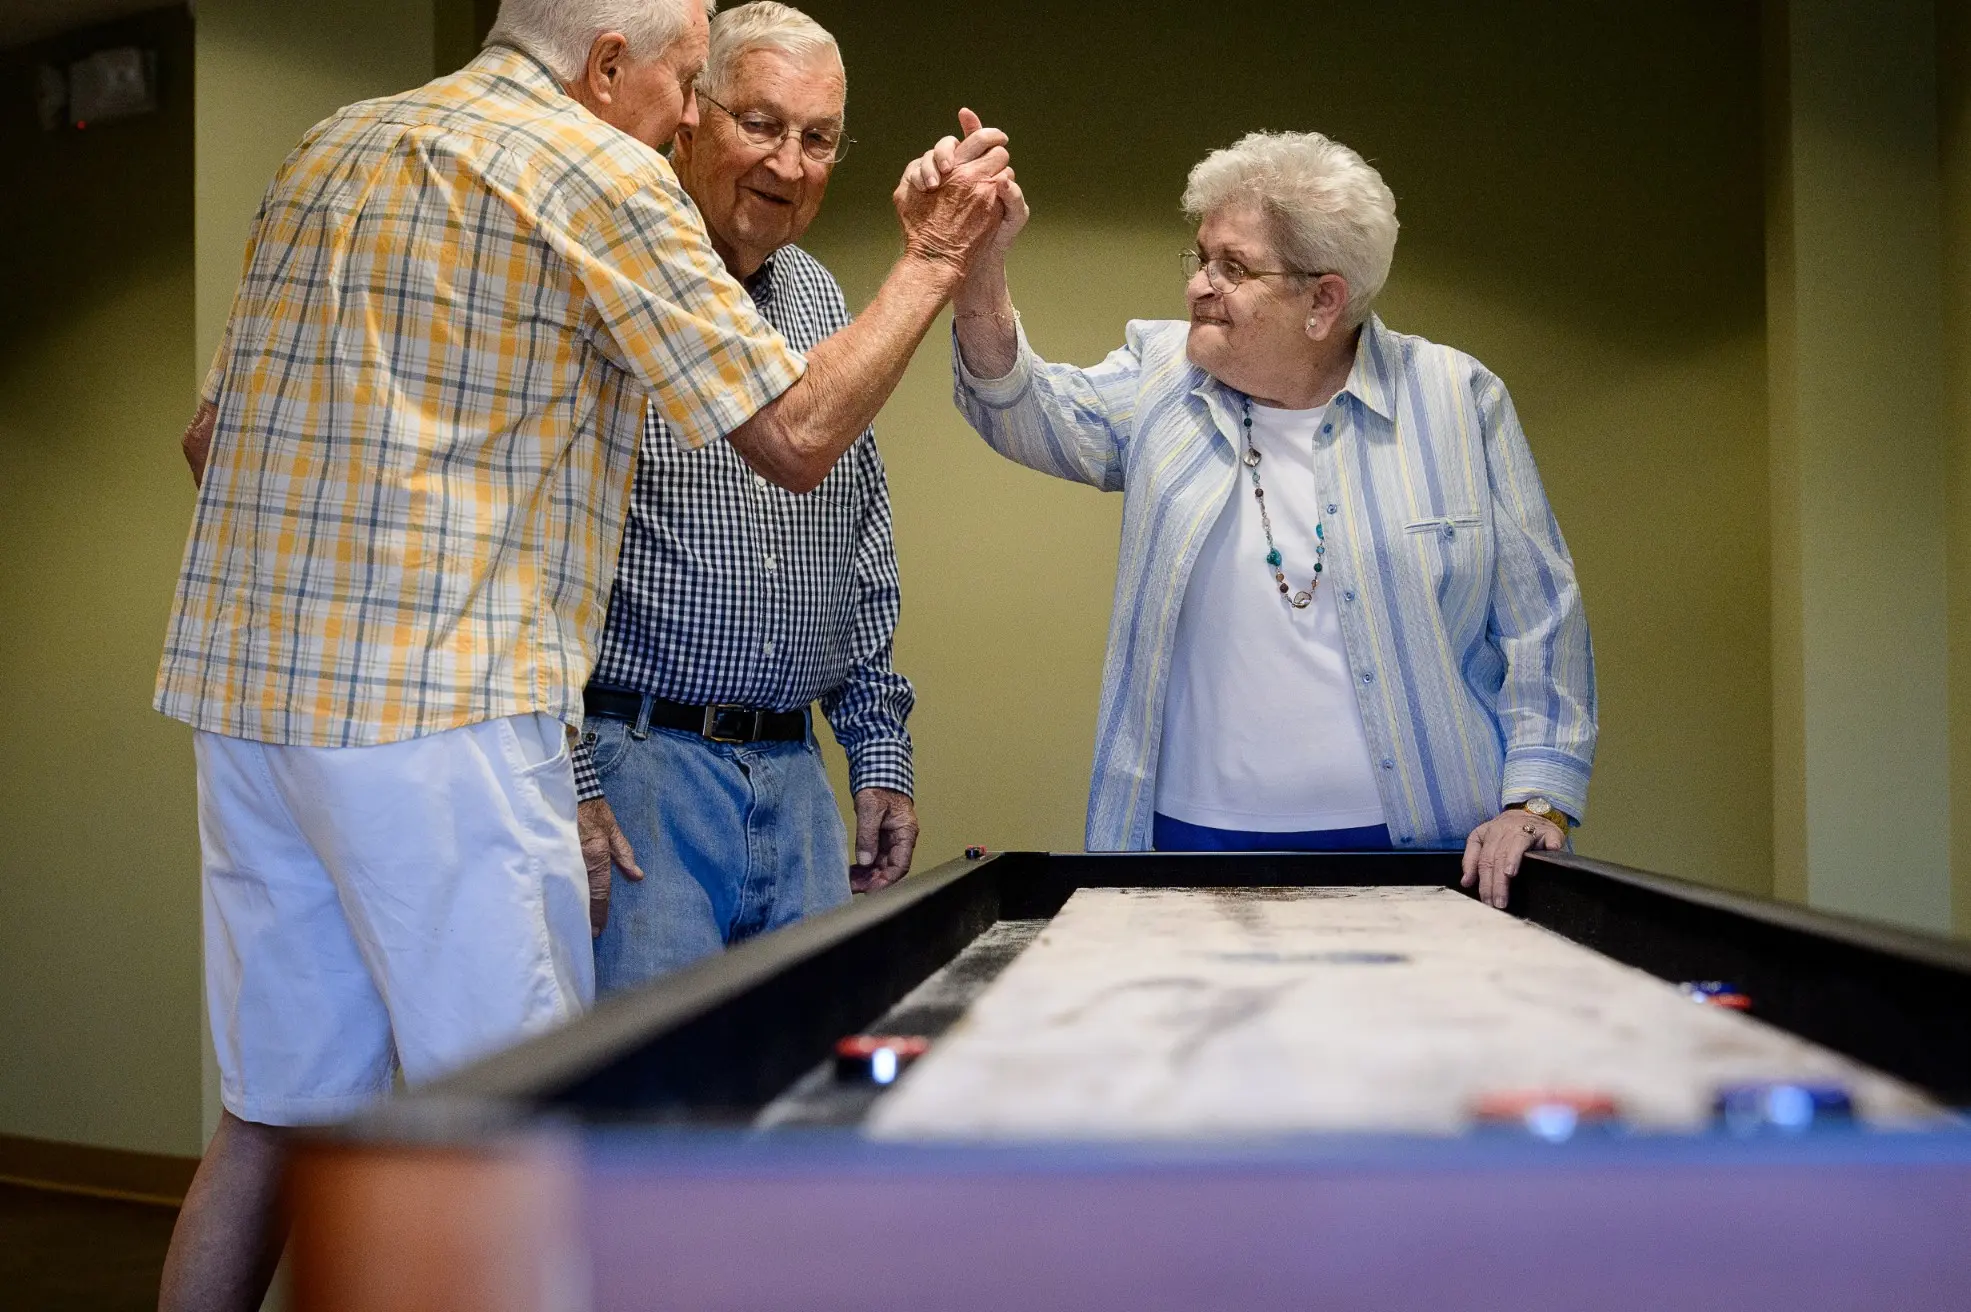 Seniors participating in the activity room of a senior living community in Niceville, FL